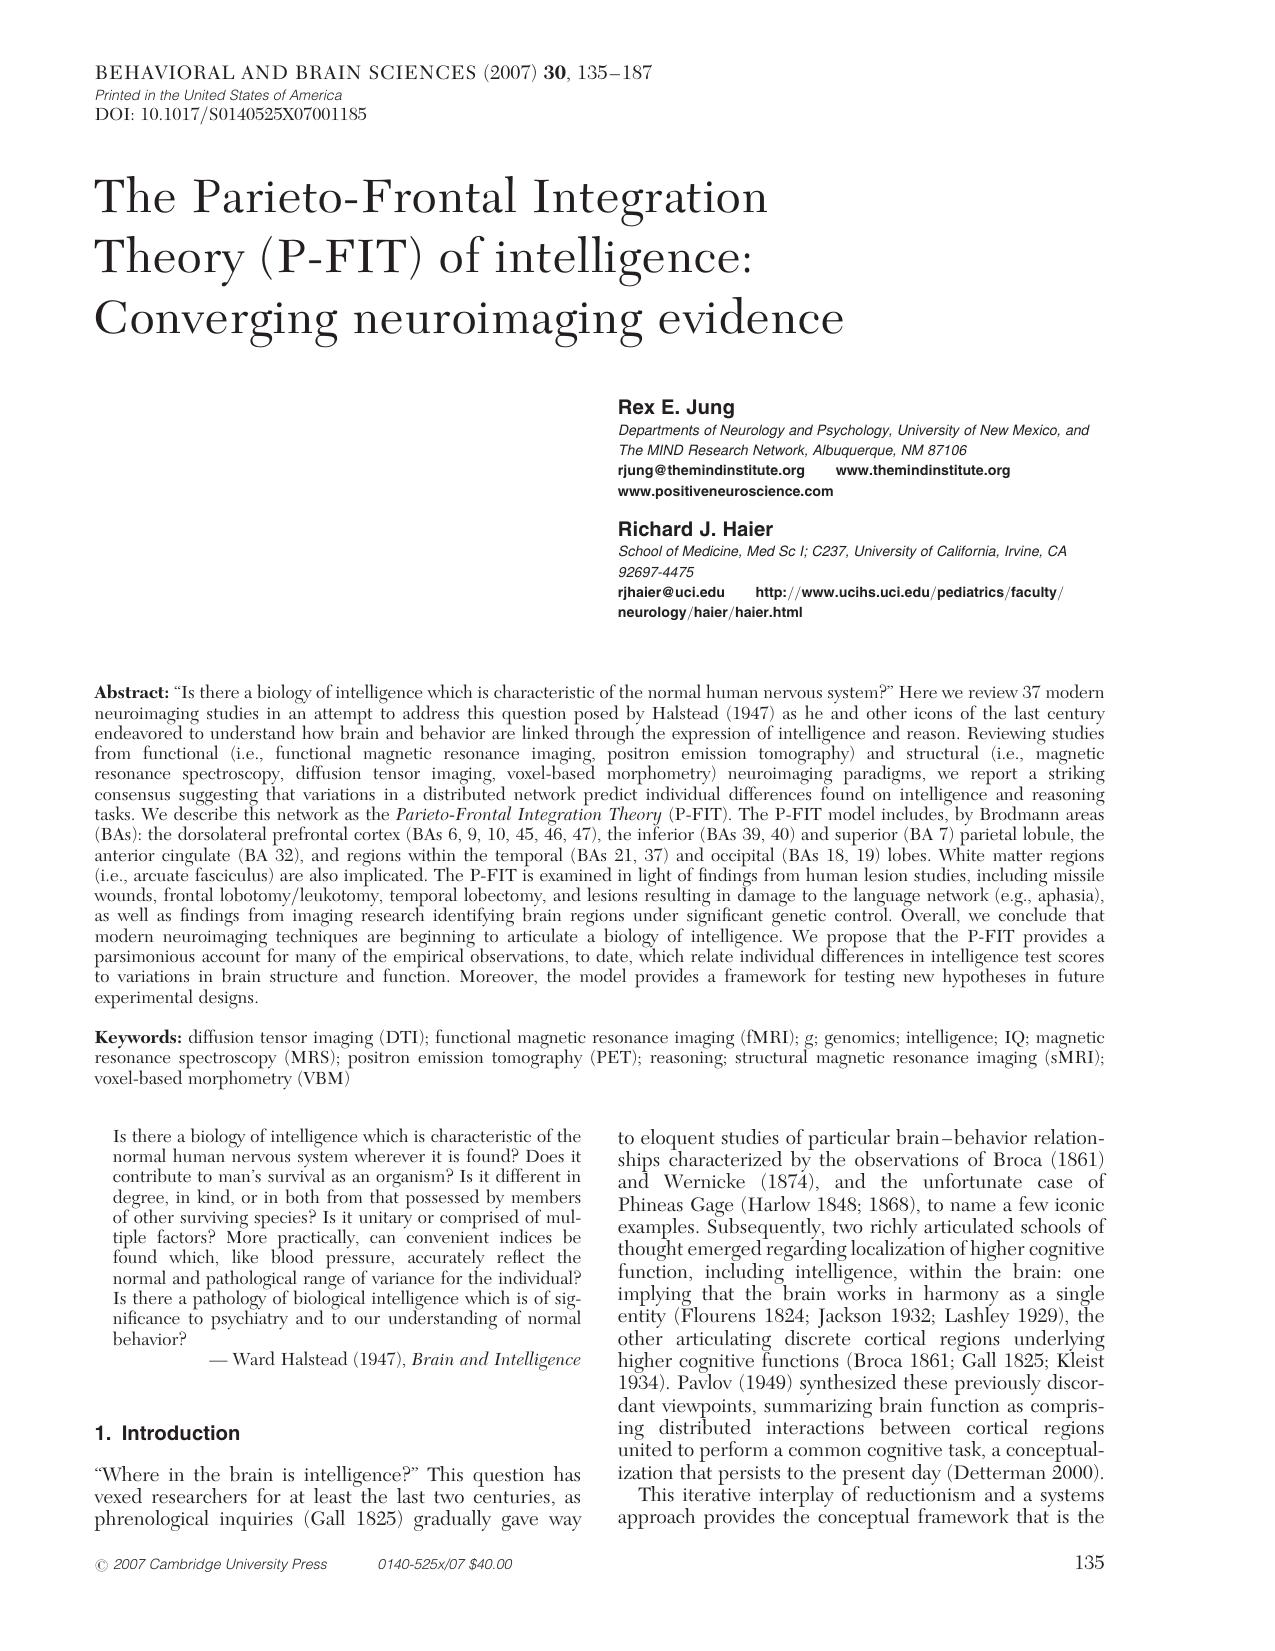 The Parieto-Frontal Integration Theory (P-FIT) of intelligence: Converging neuroimaging evidence - Paper